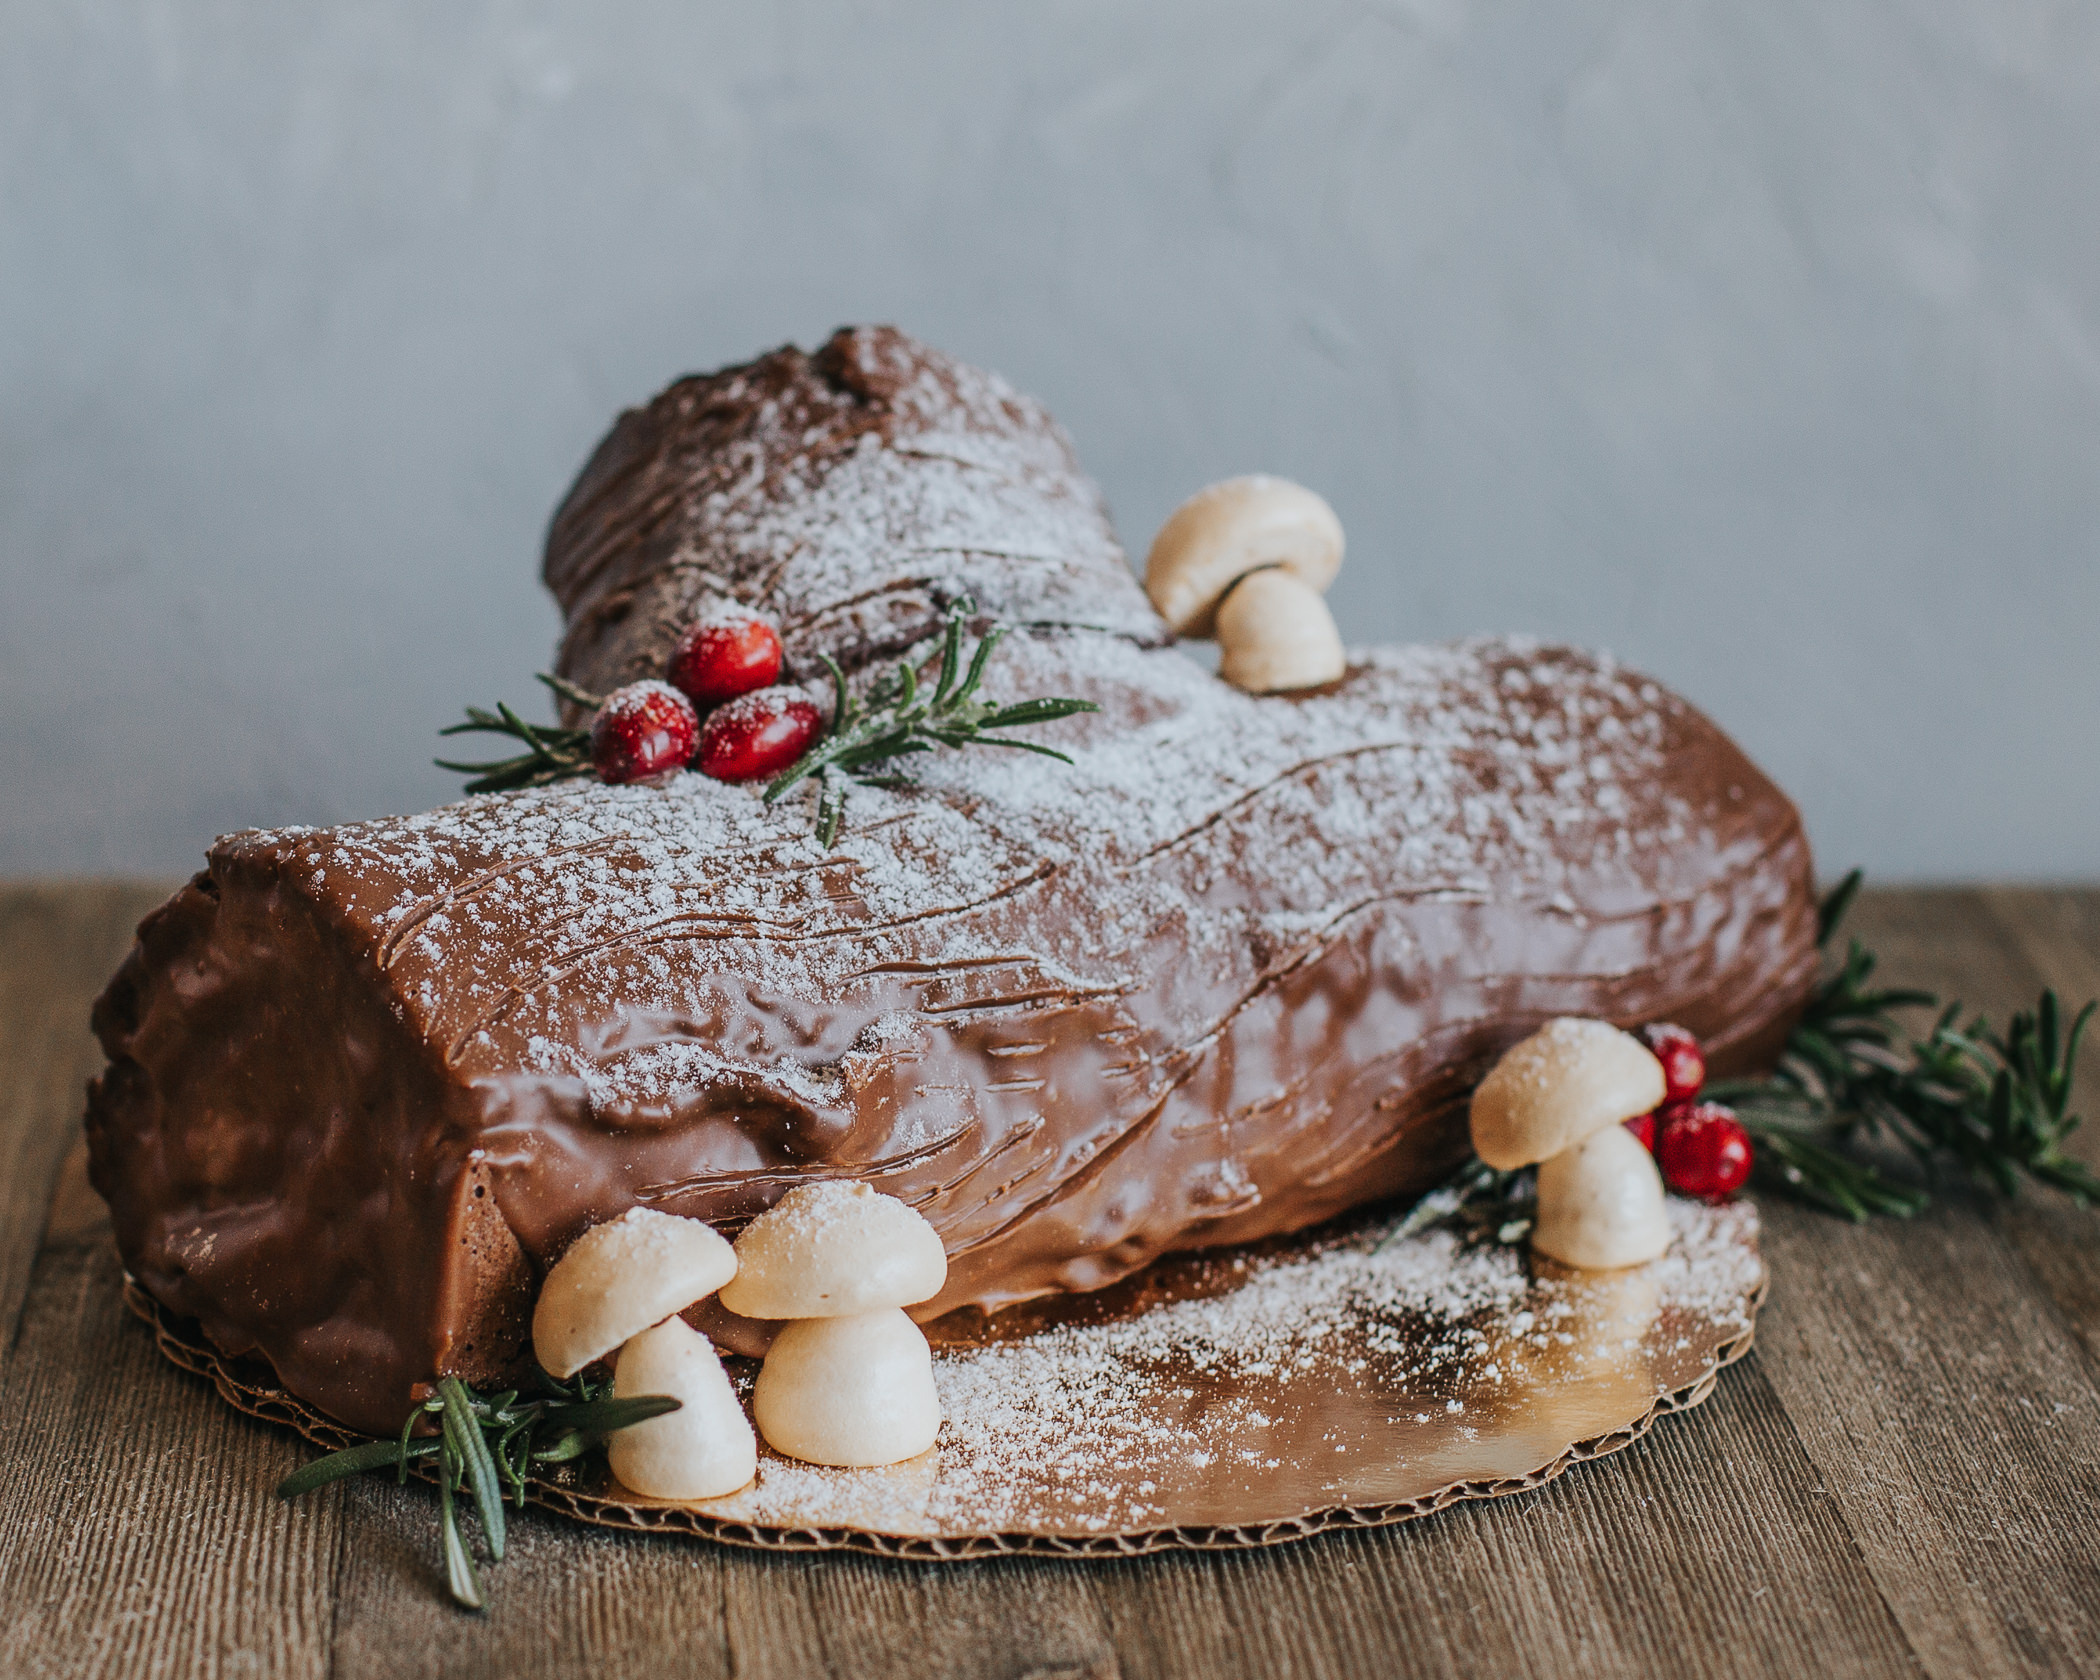 Add some 'Ho Ho' to the holiday with a mini Buche de Noel